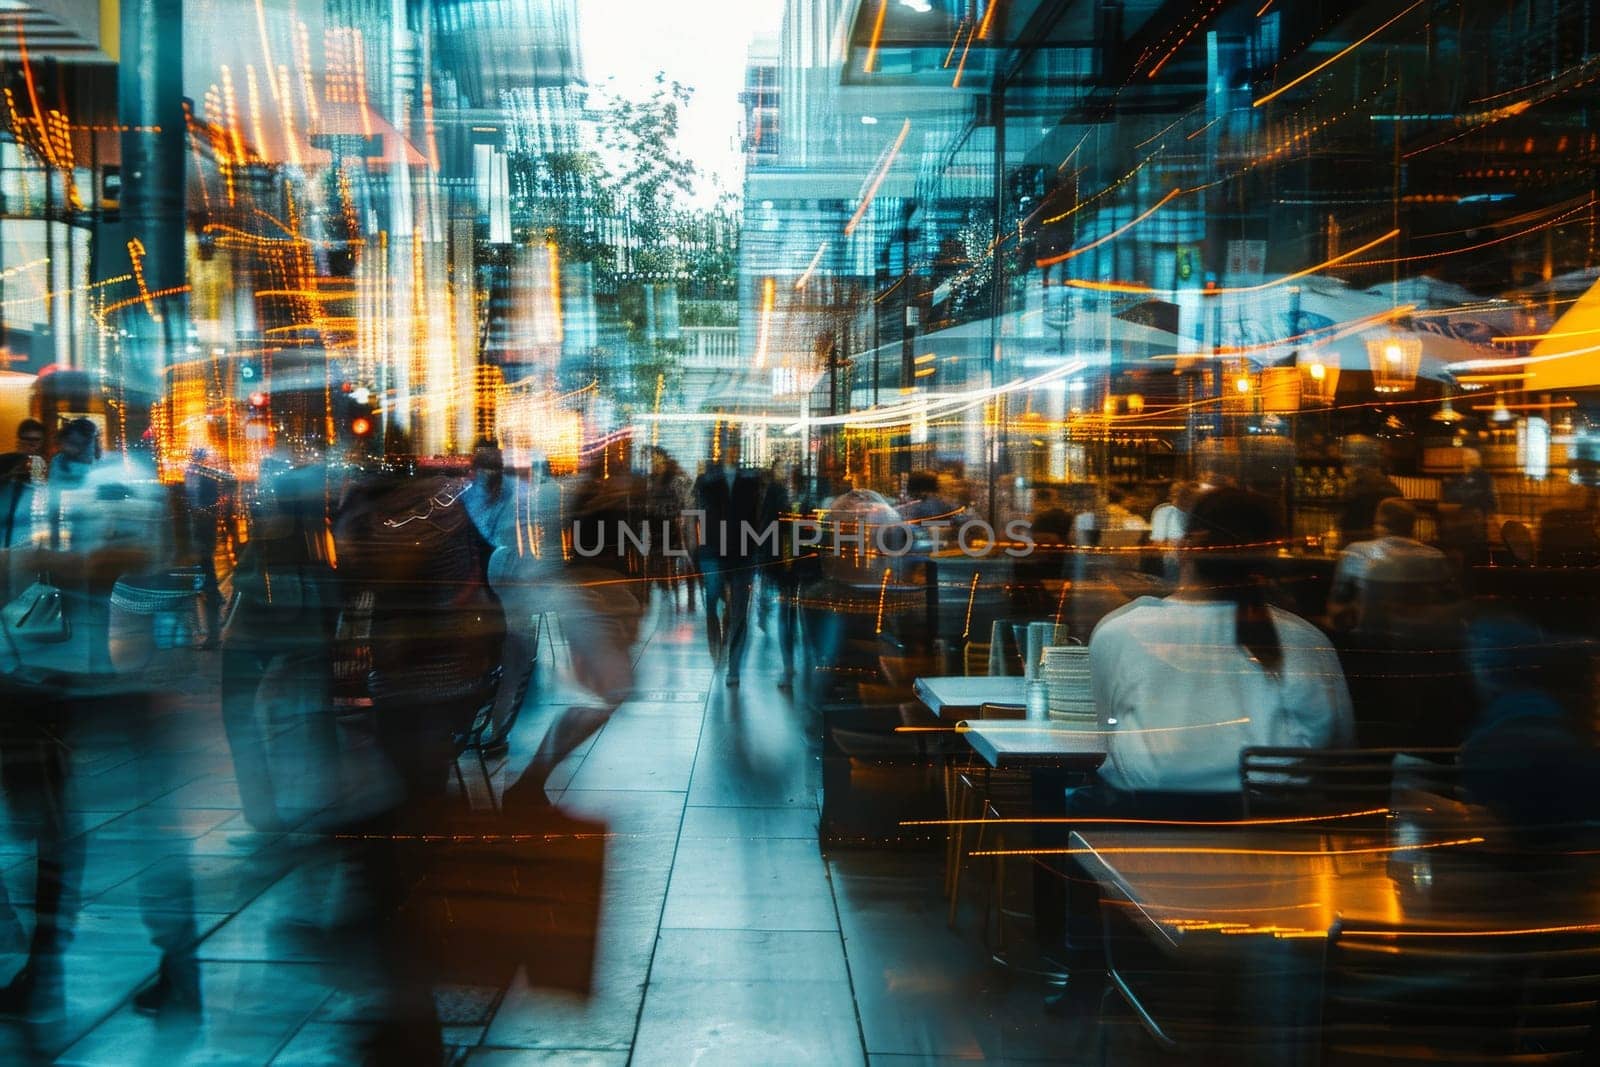 A blurry image of a busy city street with people walking and sitting at tables by itchaznong